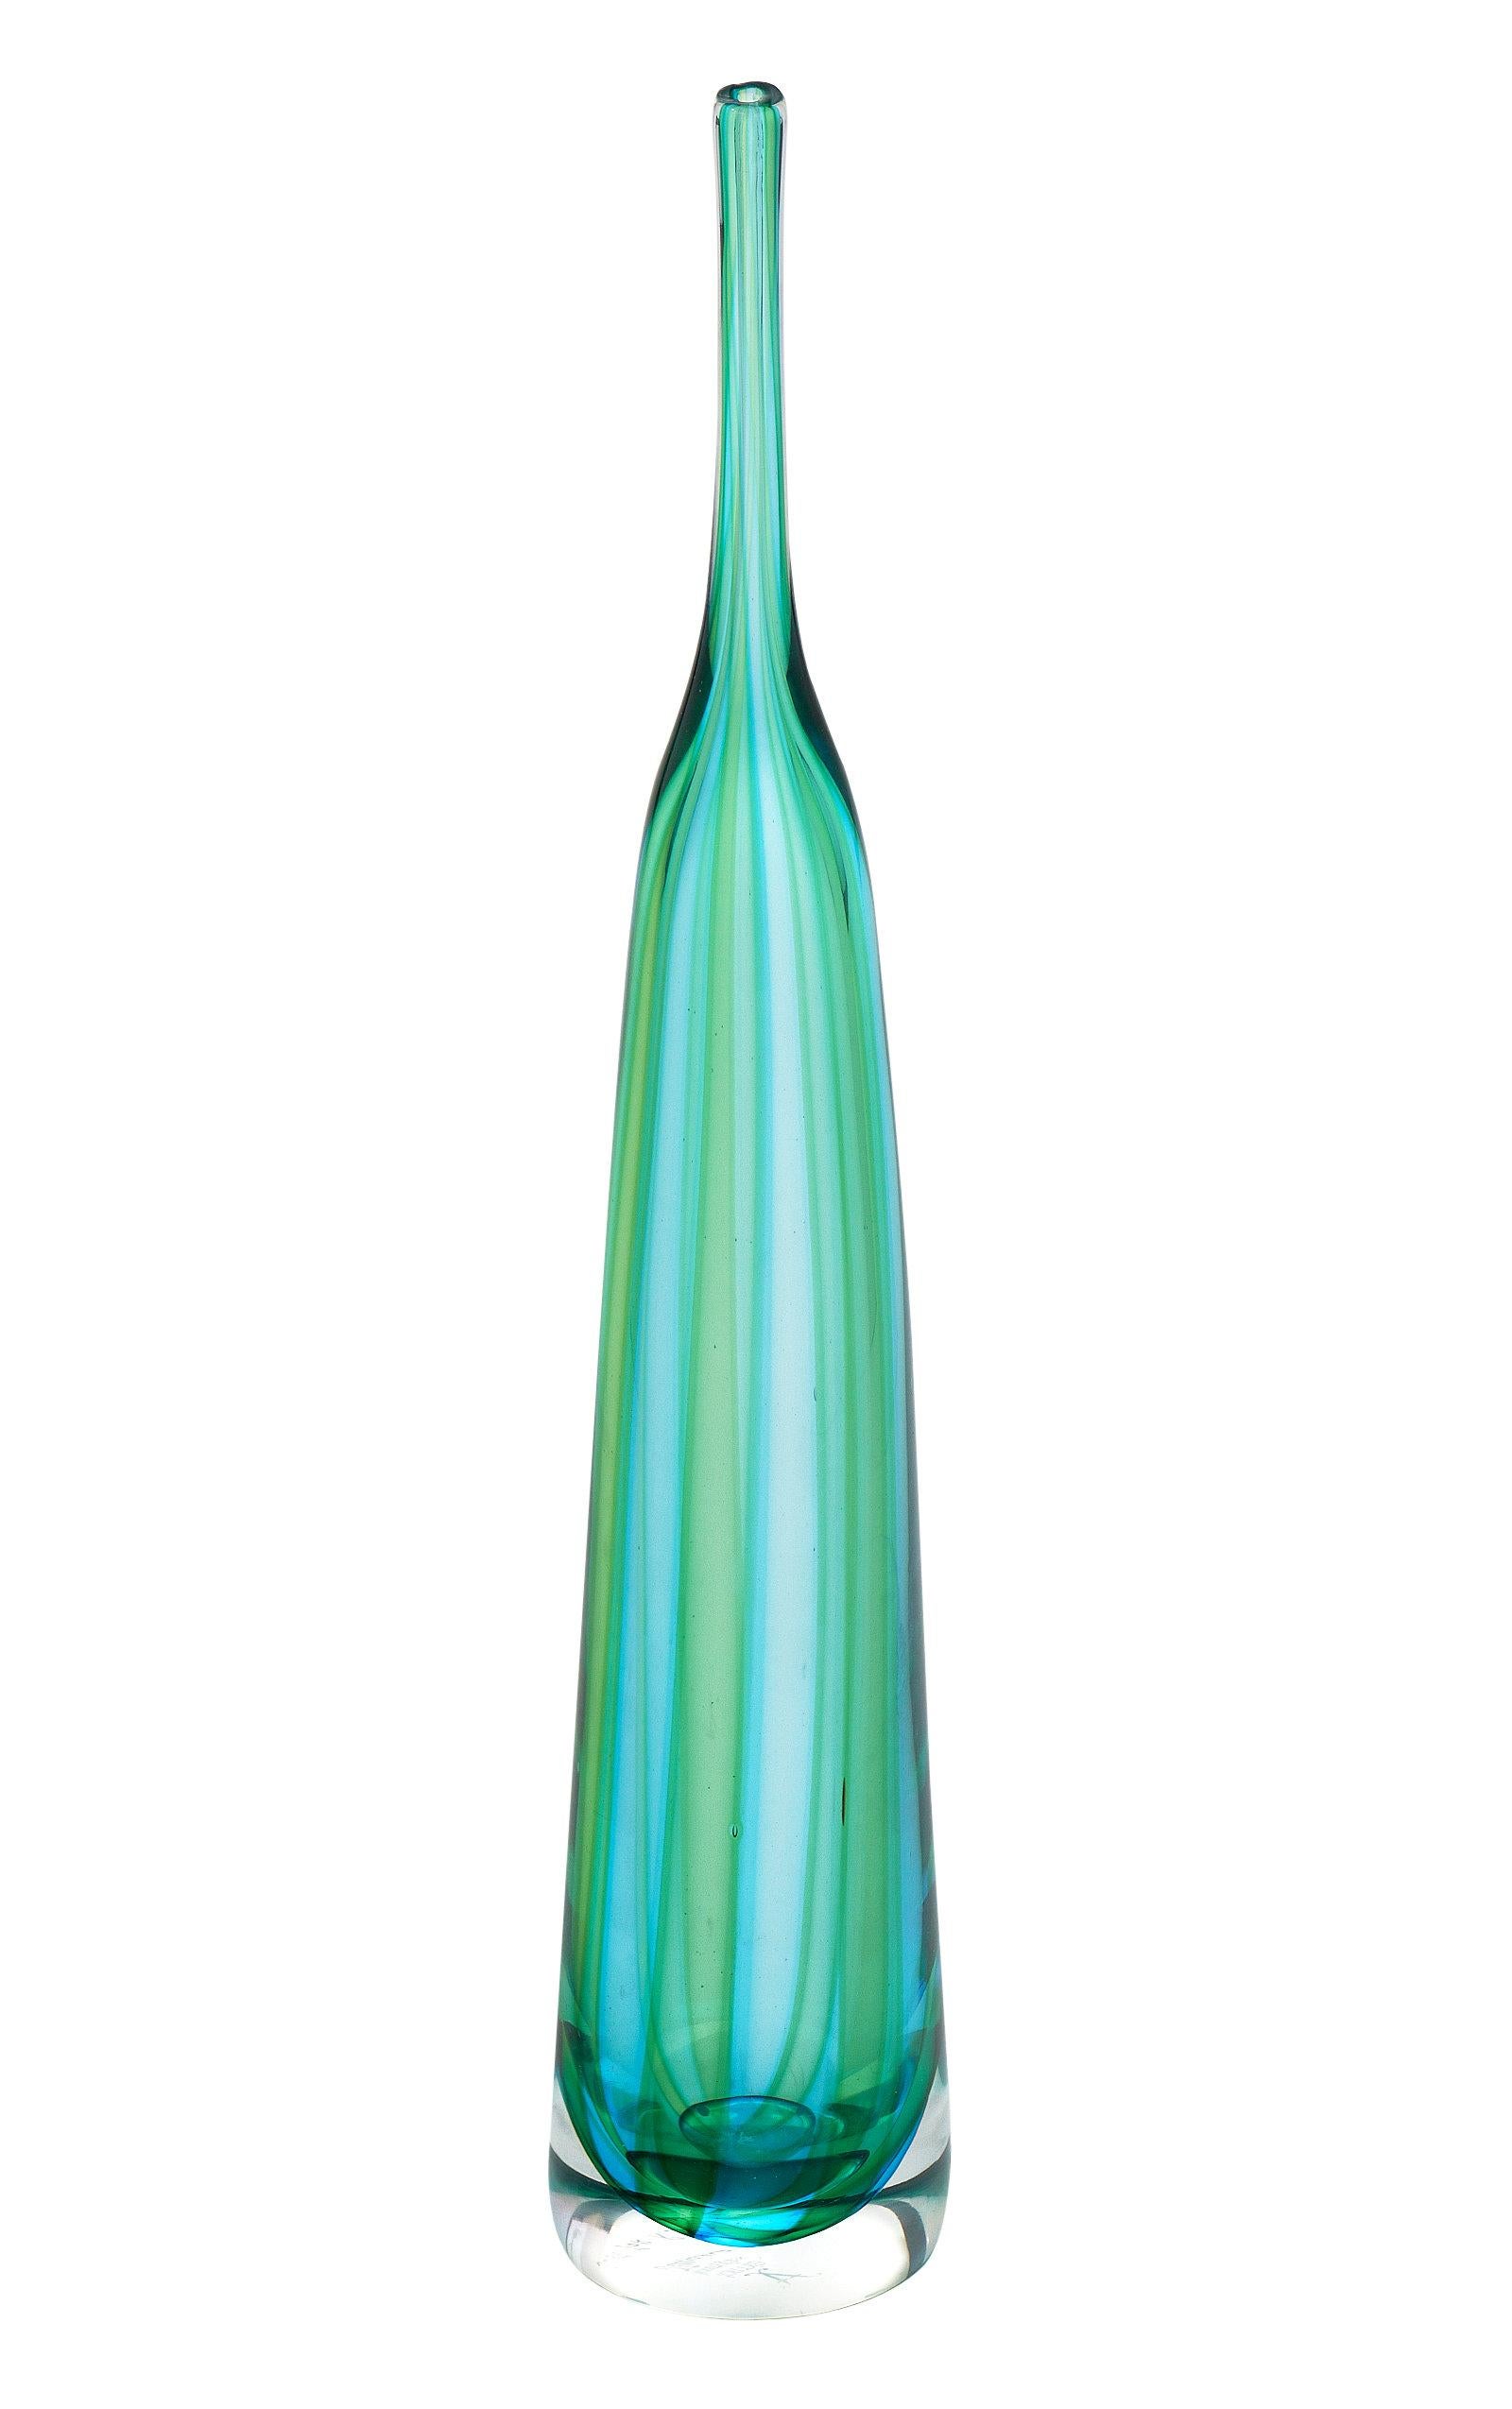 Hand-blown Murano glass pair of vases. This dynamic Murano vessel pair combines swirling shades of aqua and green glass. We love the shapes and beautiful; unique details.

The measurements listed are for the tall vase. The small vase is 9.5” in